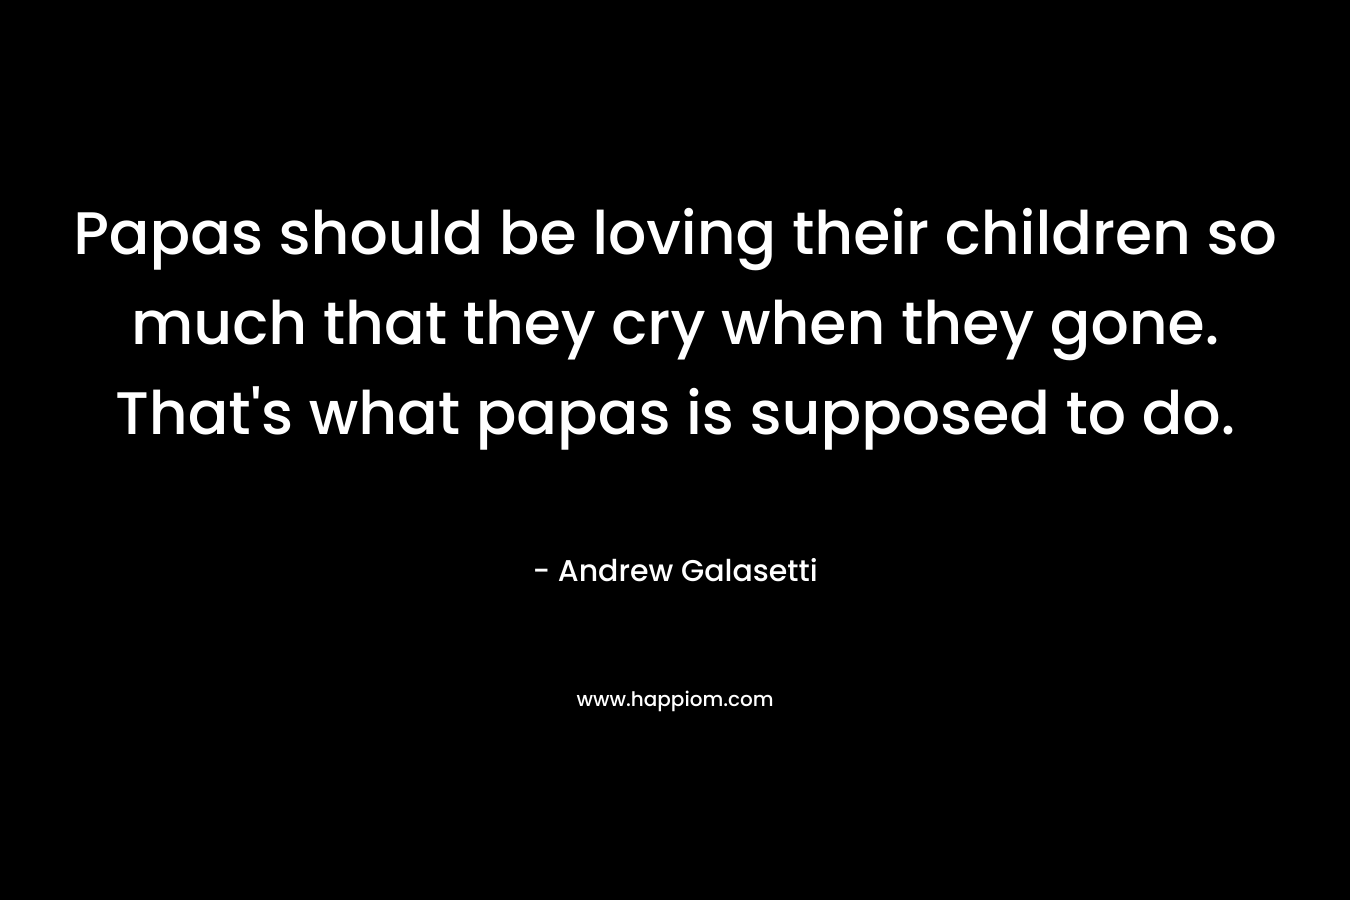 Papas should be loving their children so much that they cry when they gone. That's what papas is supposed to do.